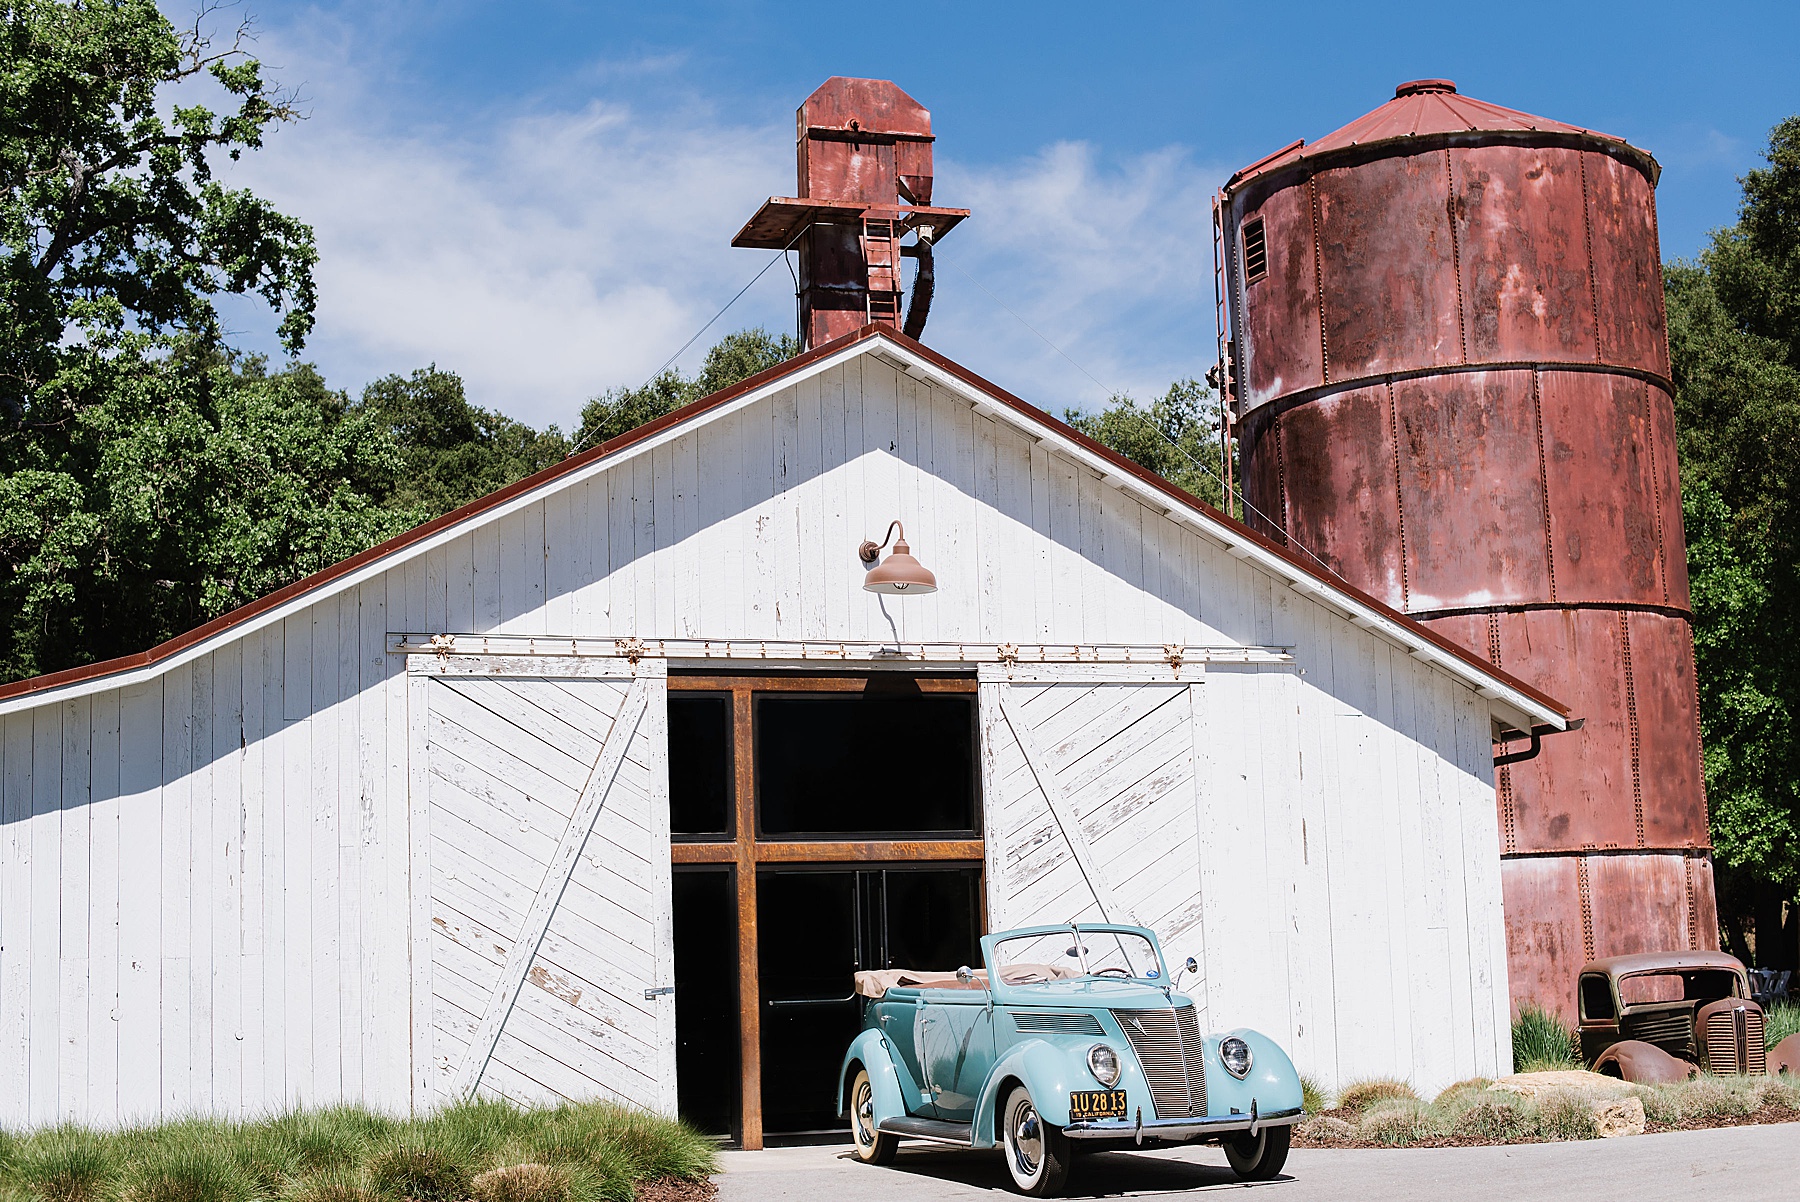 White, rustic barn that is next to a red silo. A old, vintage, blue car sits out front.